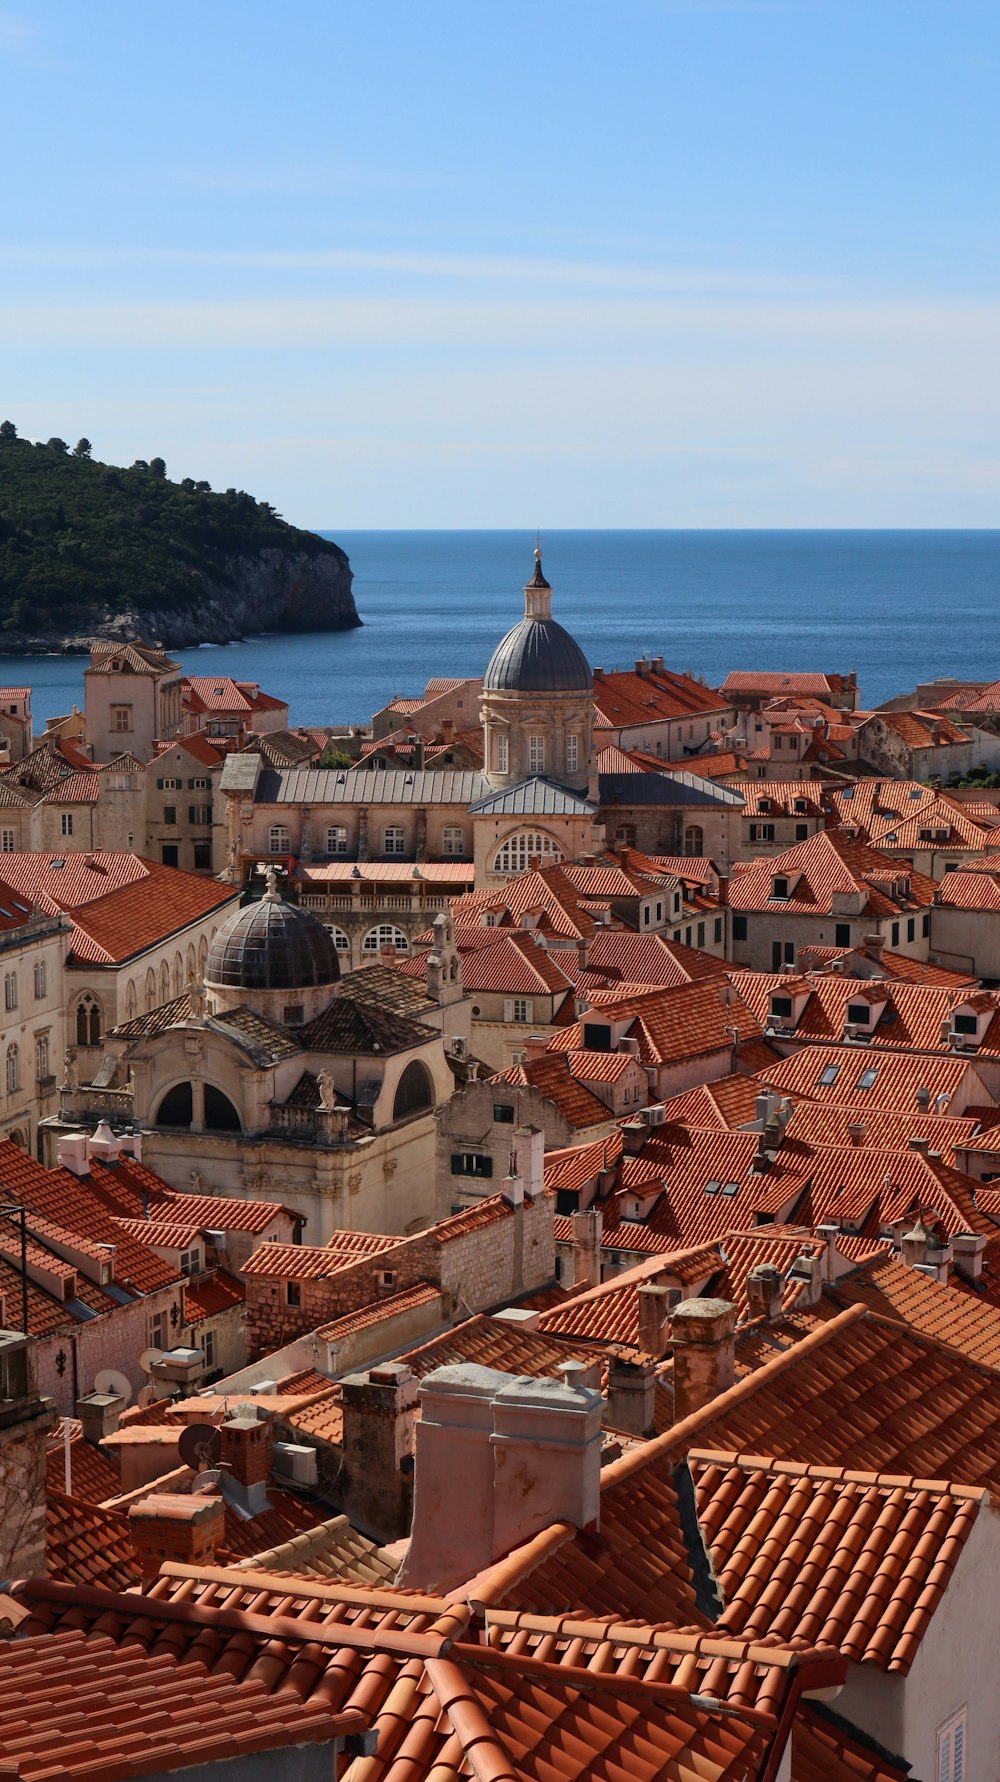 a view of a city with red roofs and a body of water in the background